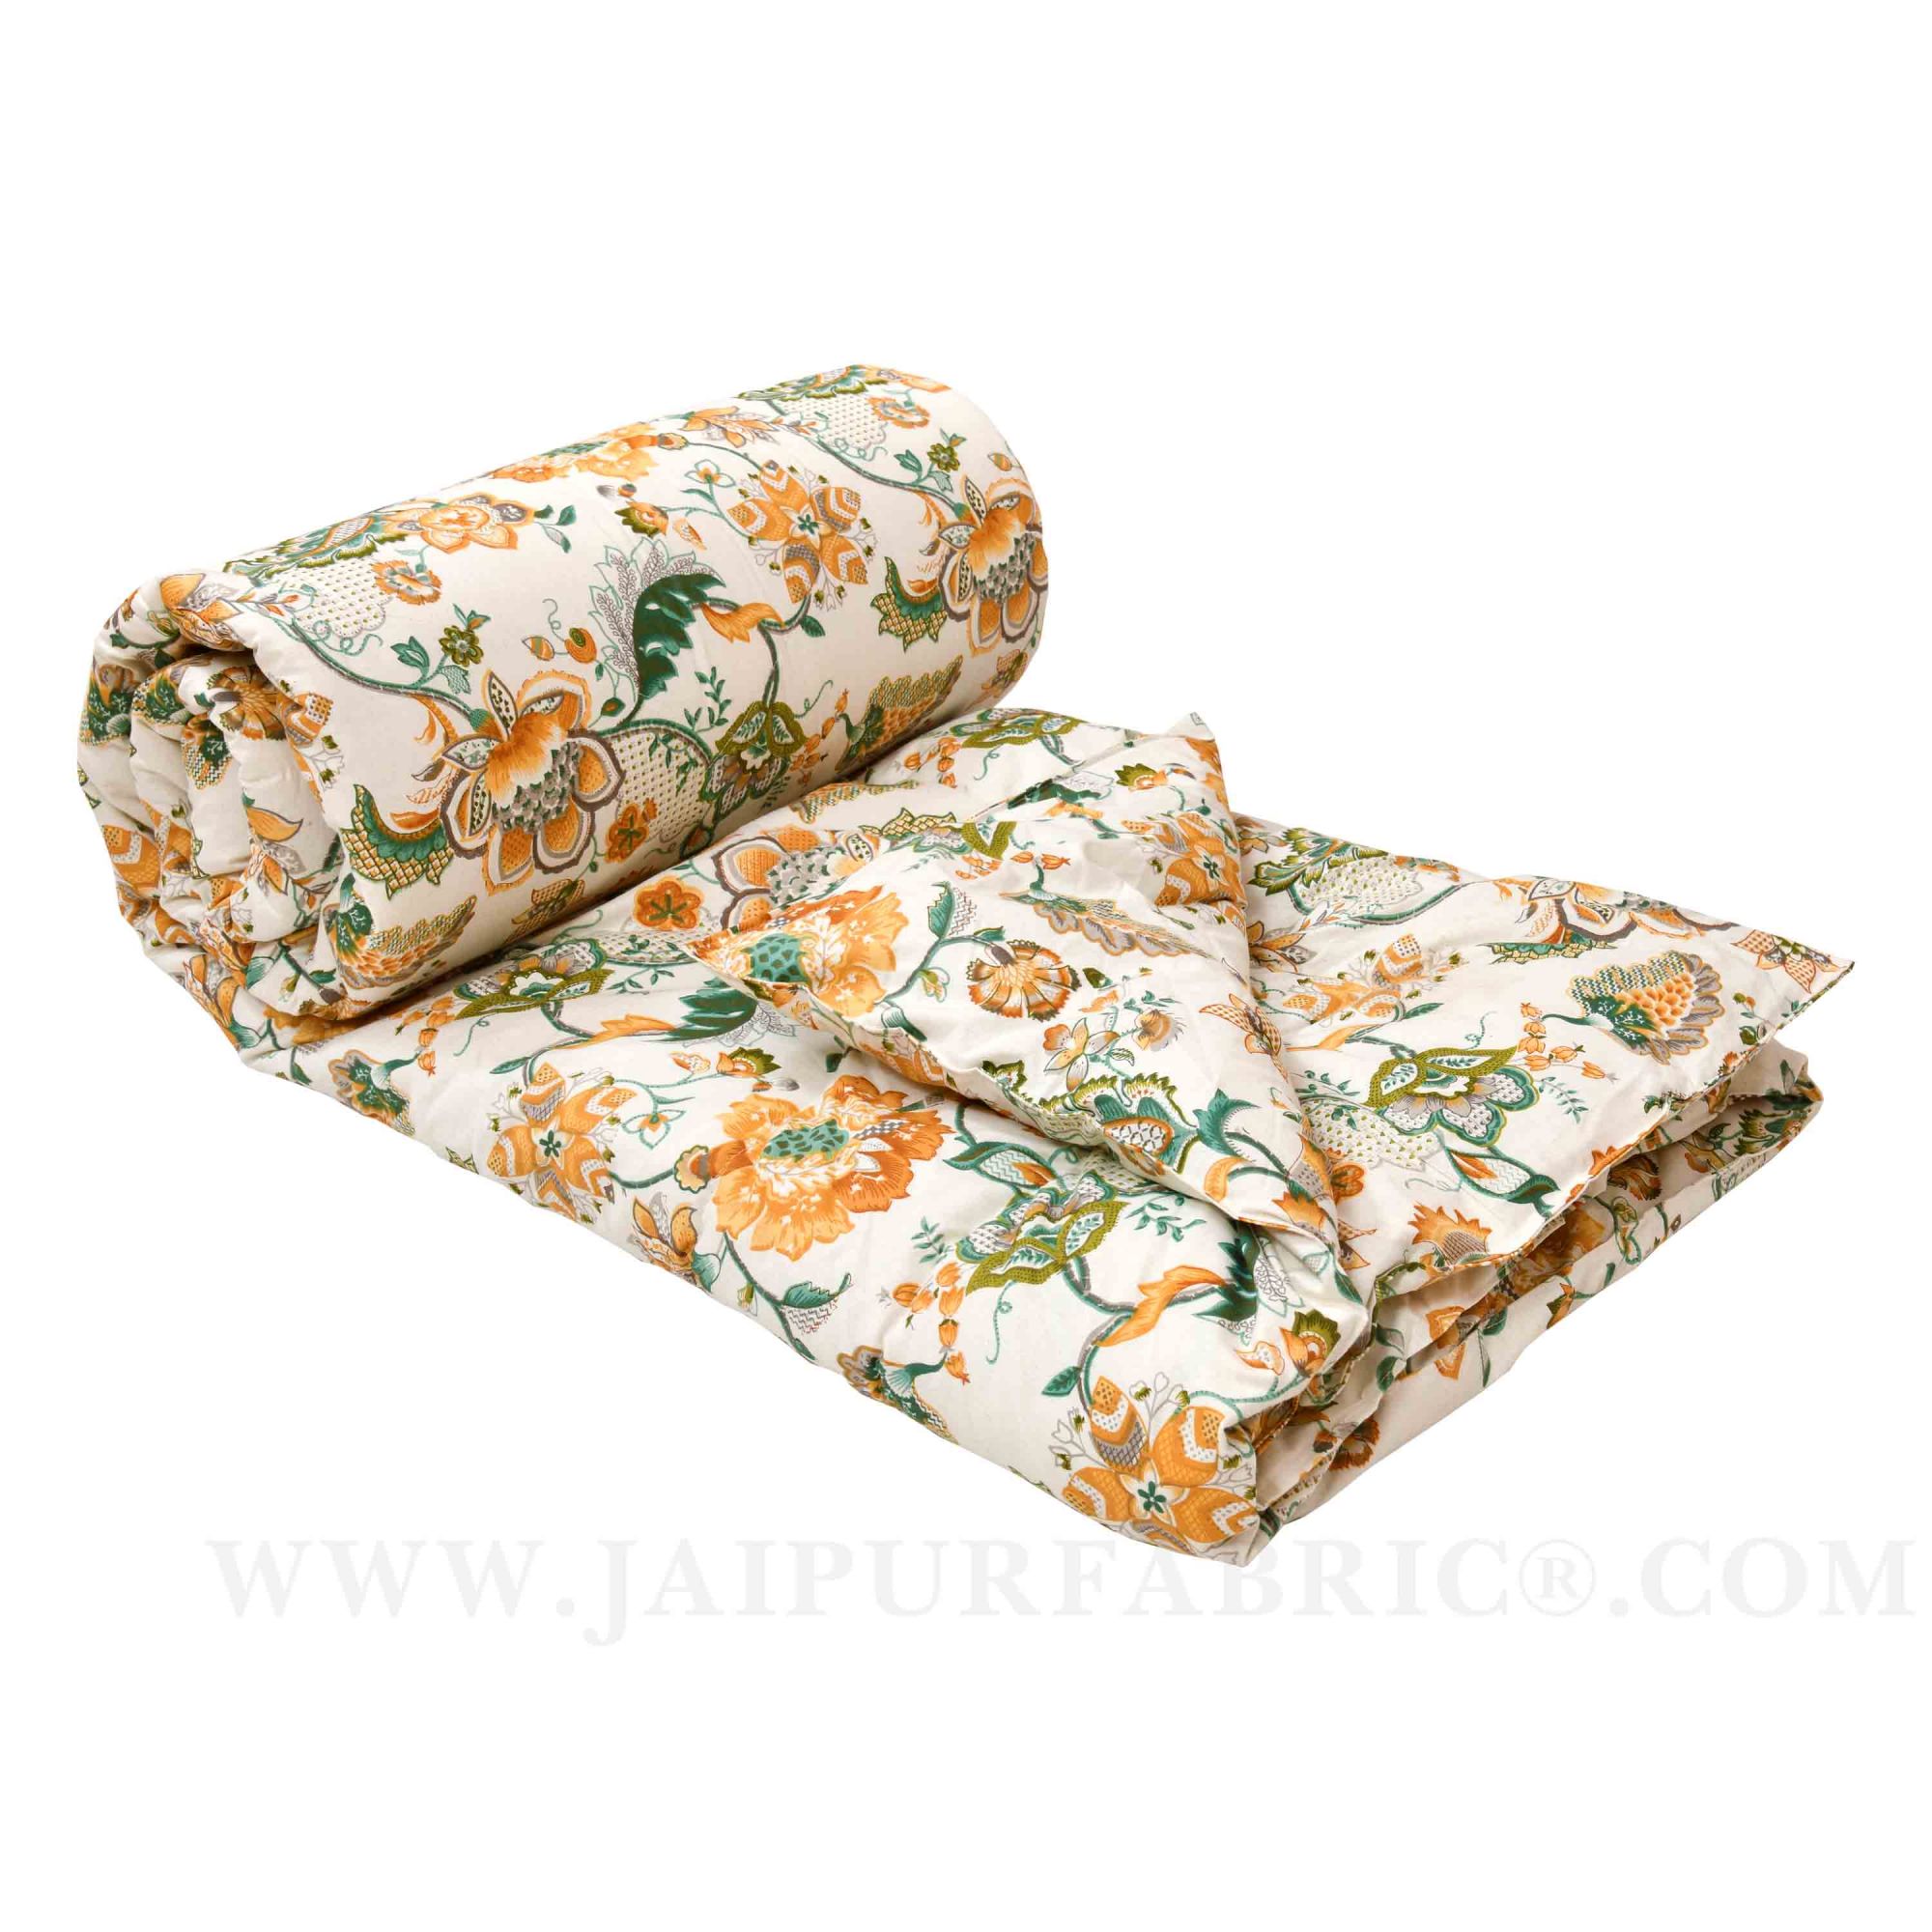 JaipurFabric® Anokhi Print Royal Orchid Peach Double Bed Comforter